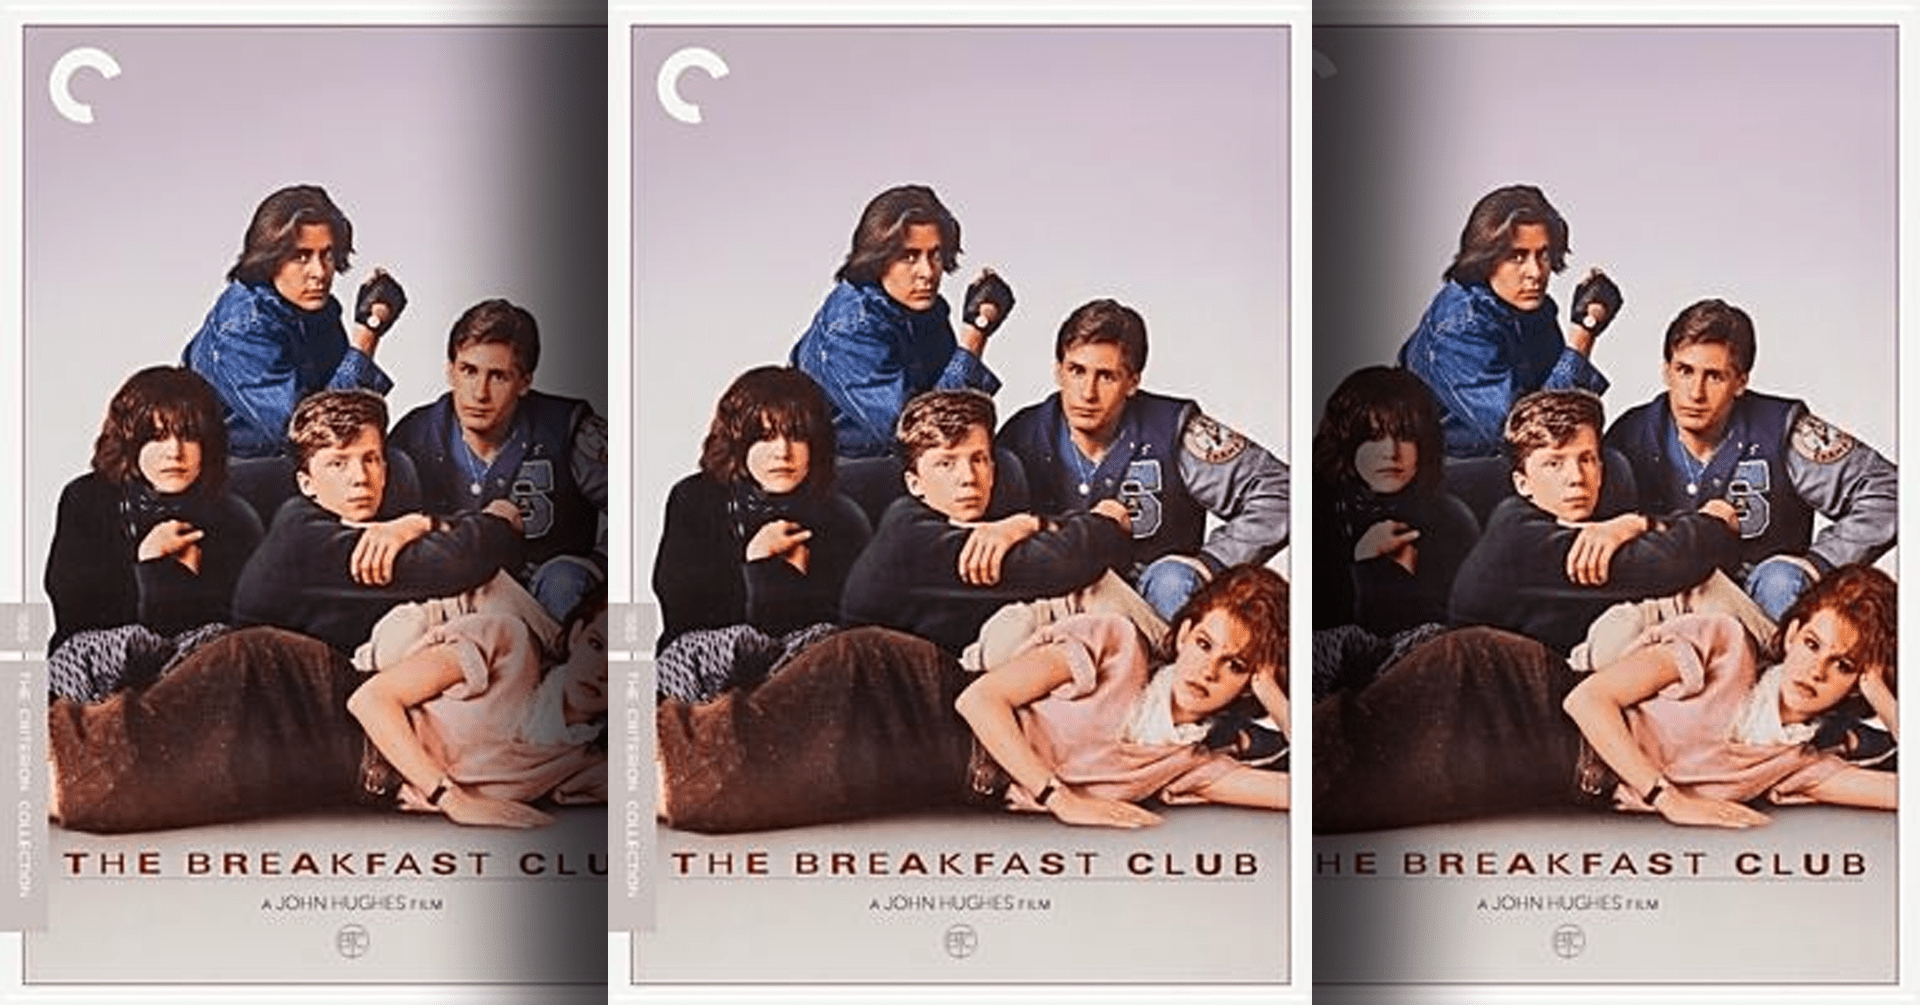 "The Breakfast Club" movie cover